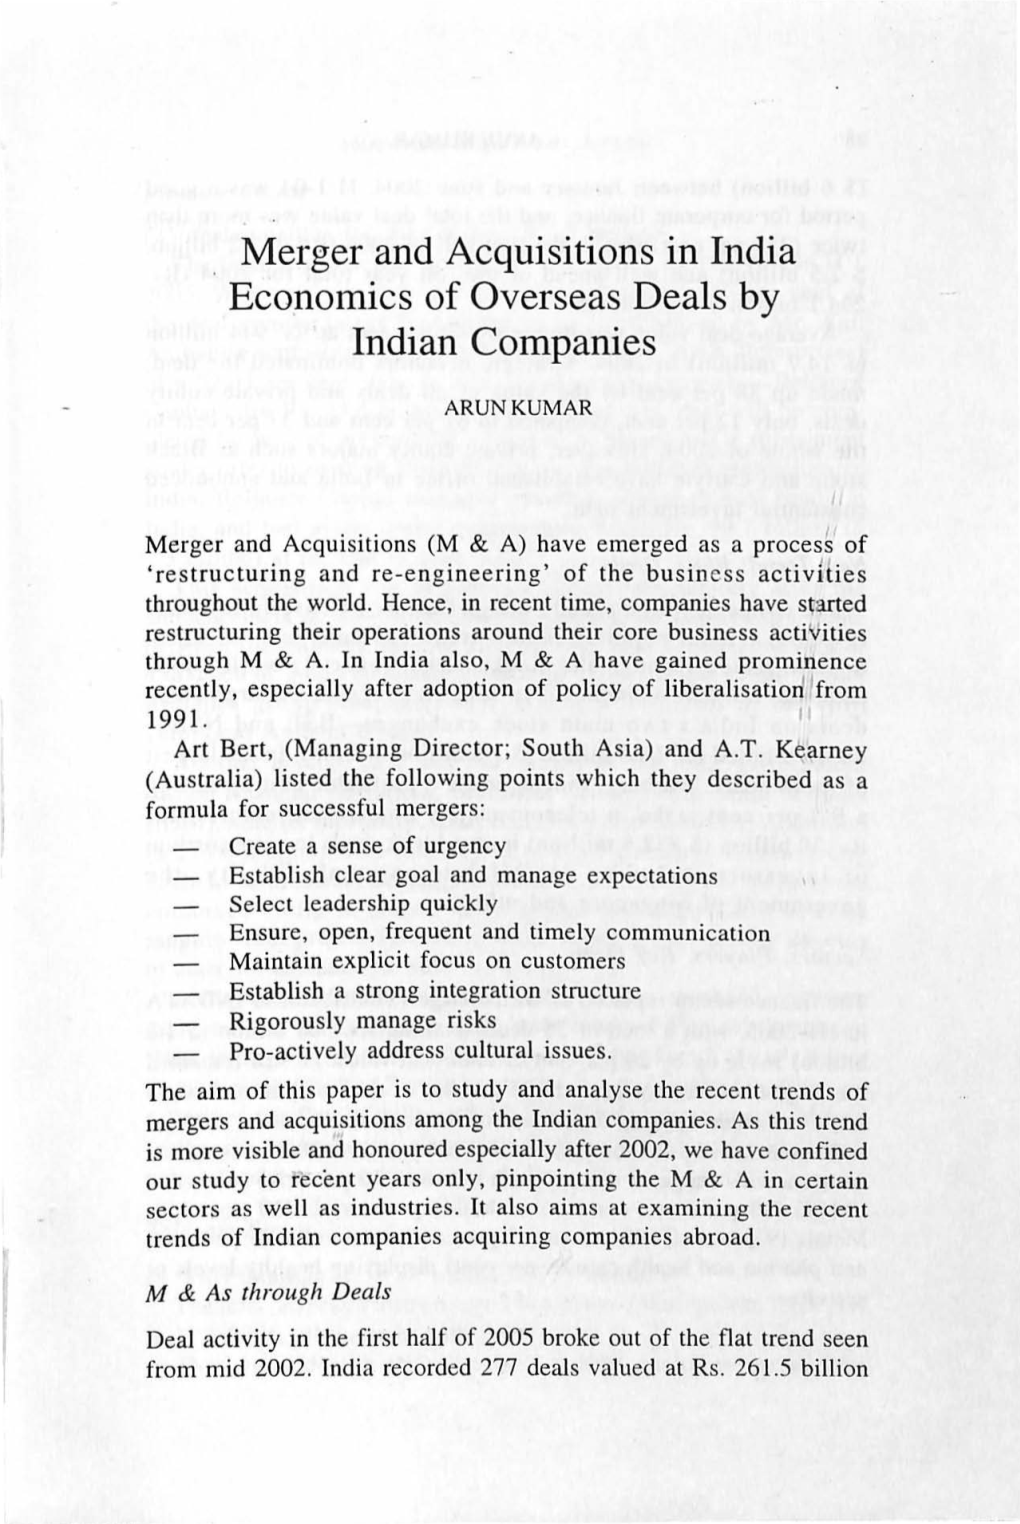 Merger and Acquisitions in India Economics of Overseas Deals by Indian Companies